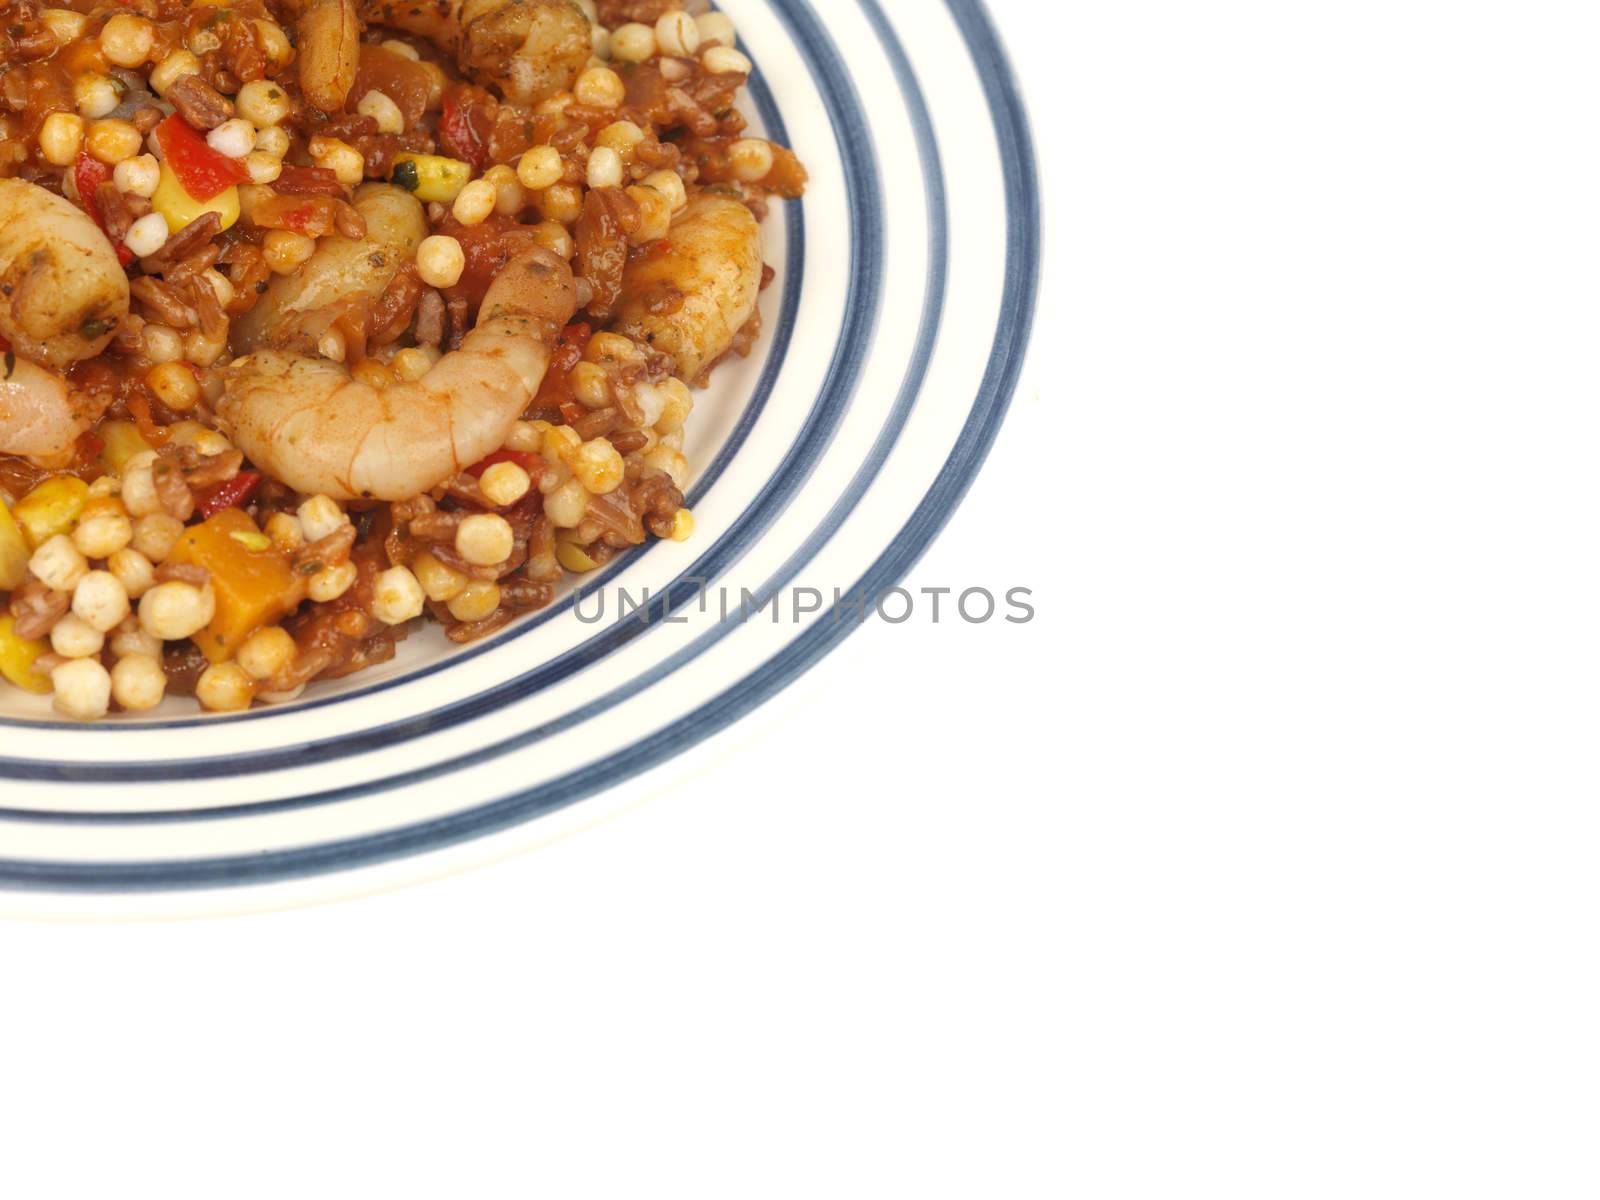 Prawns with Couscous by Whiteboxmedia